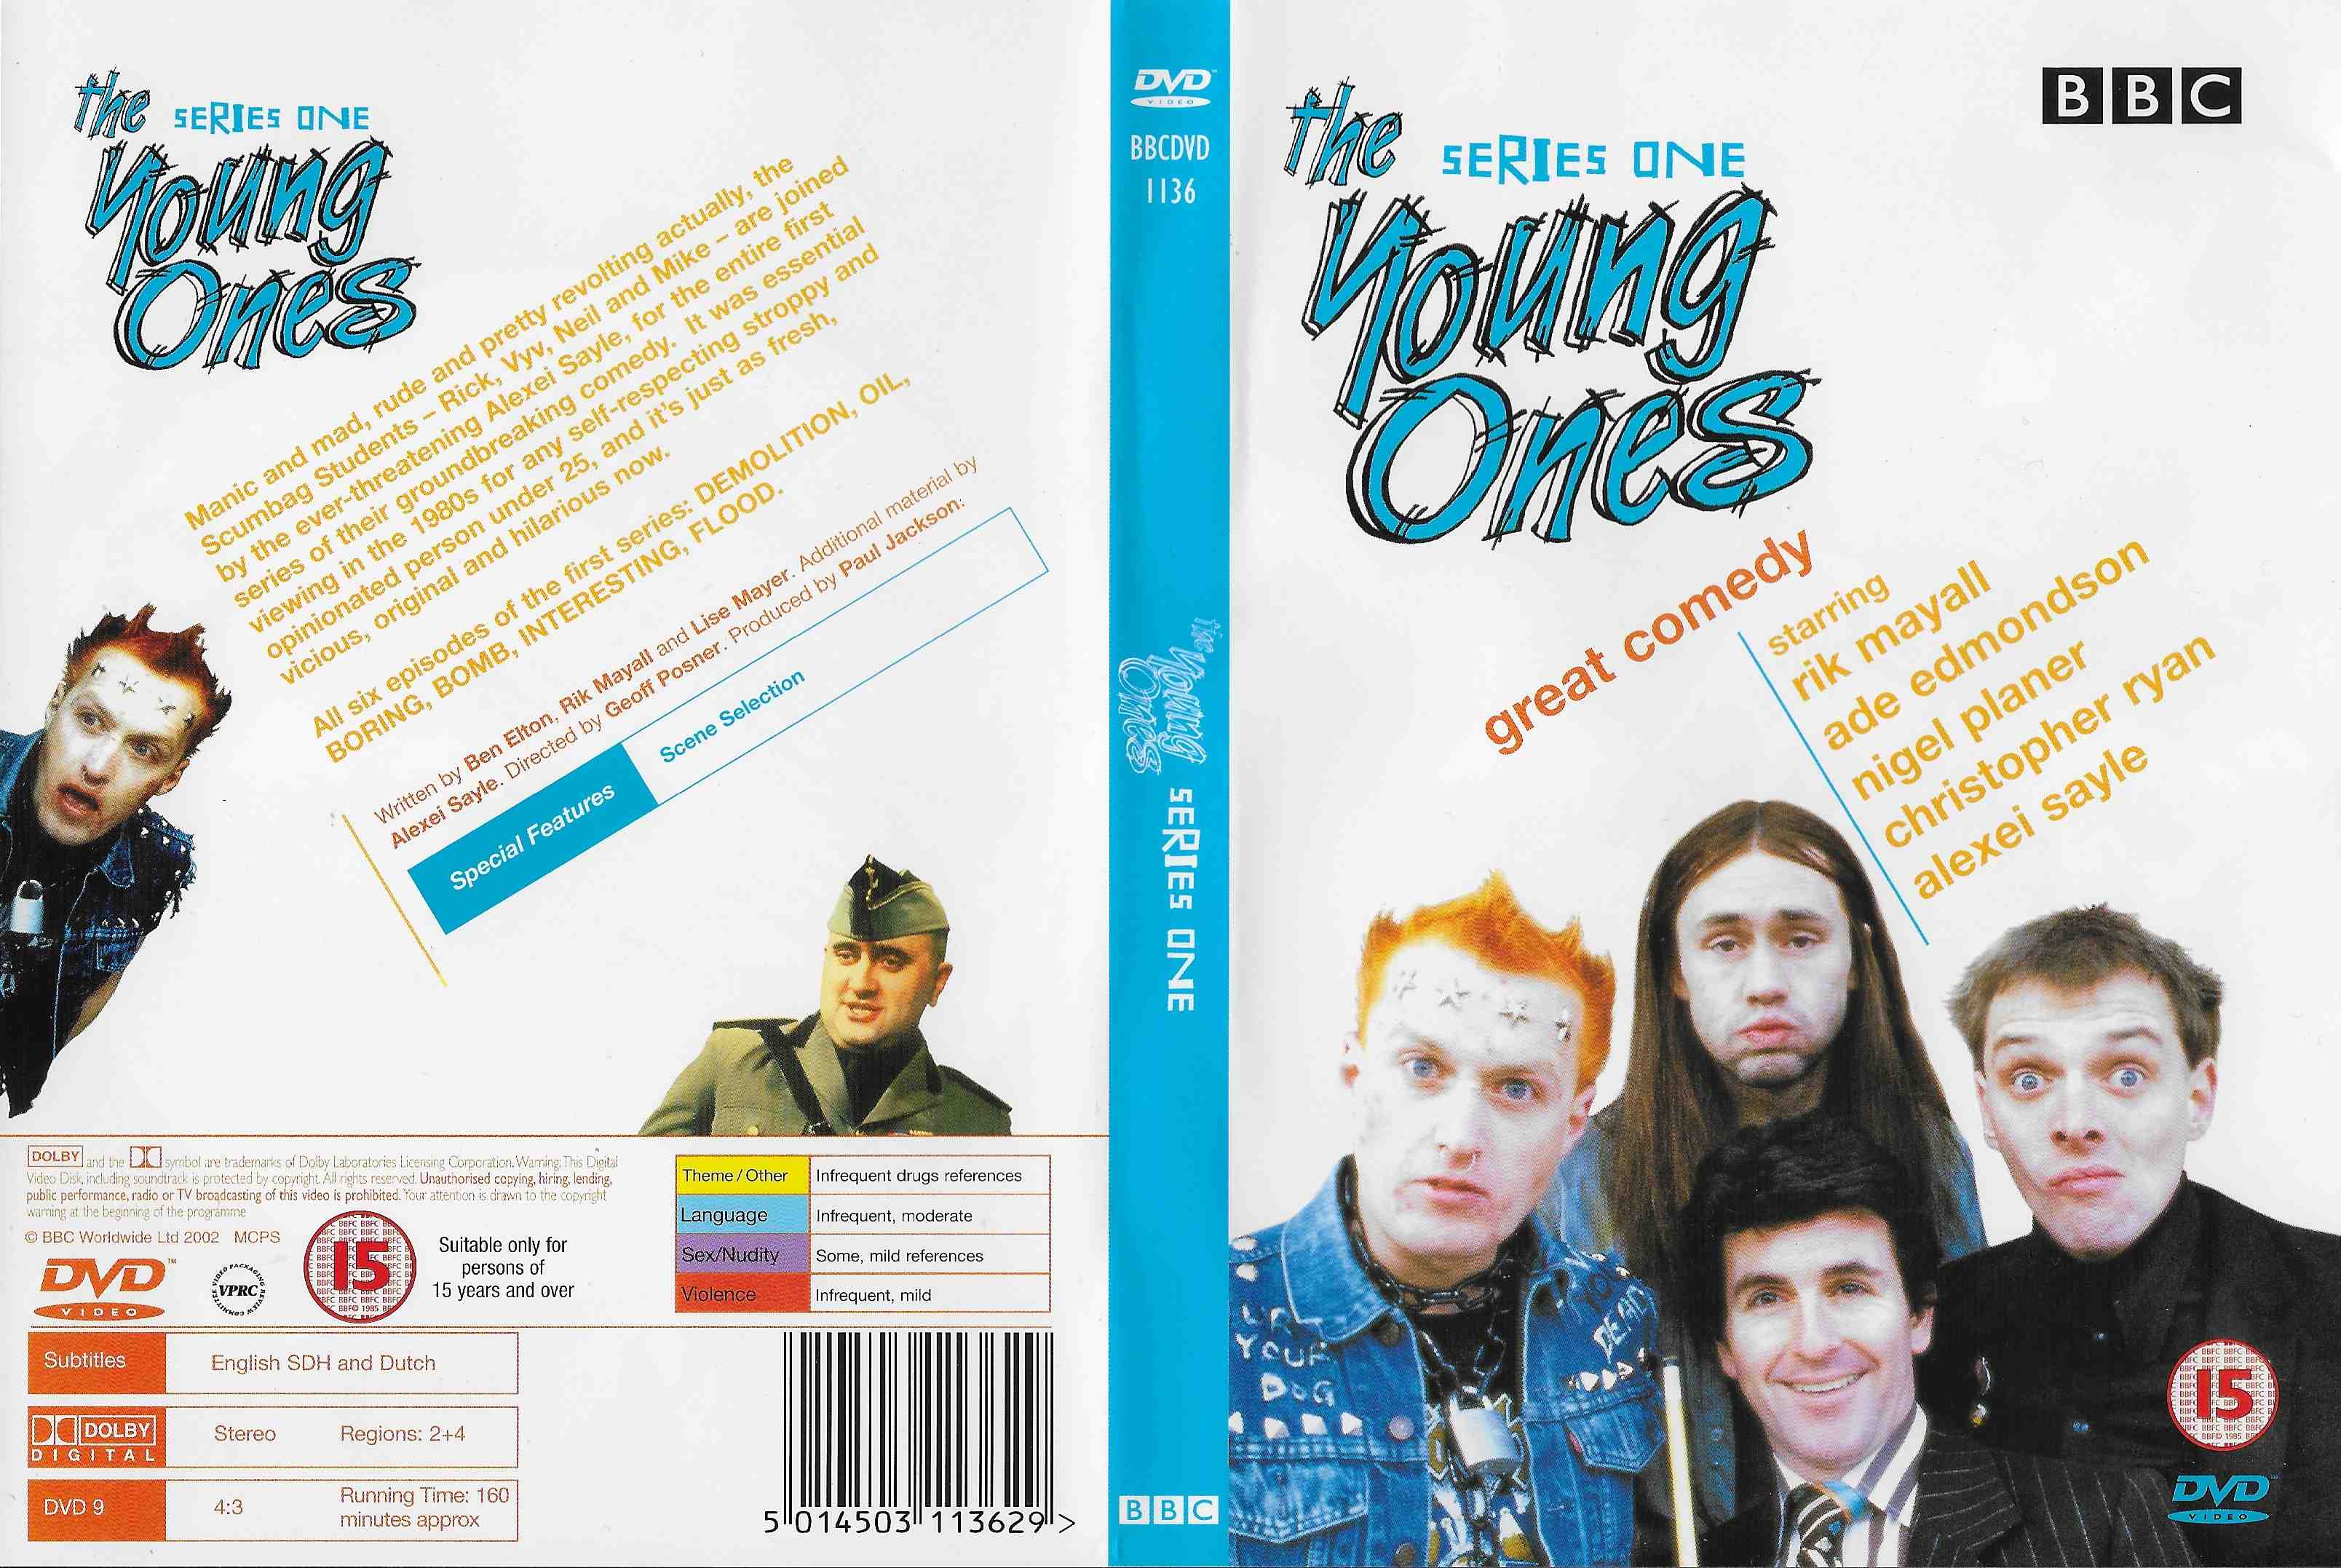 Picture of BBCDVD 1136 The young ones - Series 1 by artist Ben Elton / Rik Mayall / Lise Mayer / Alexei Sayle from the BBC records and Tapes library